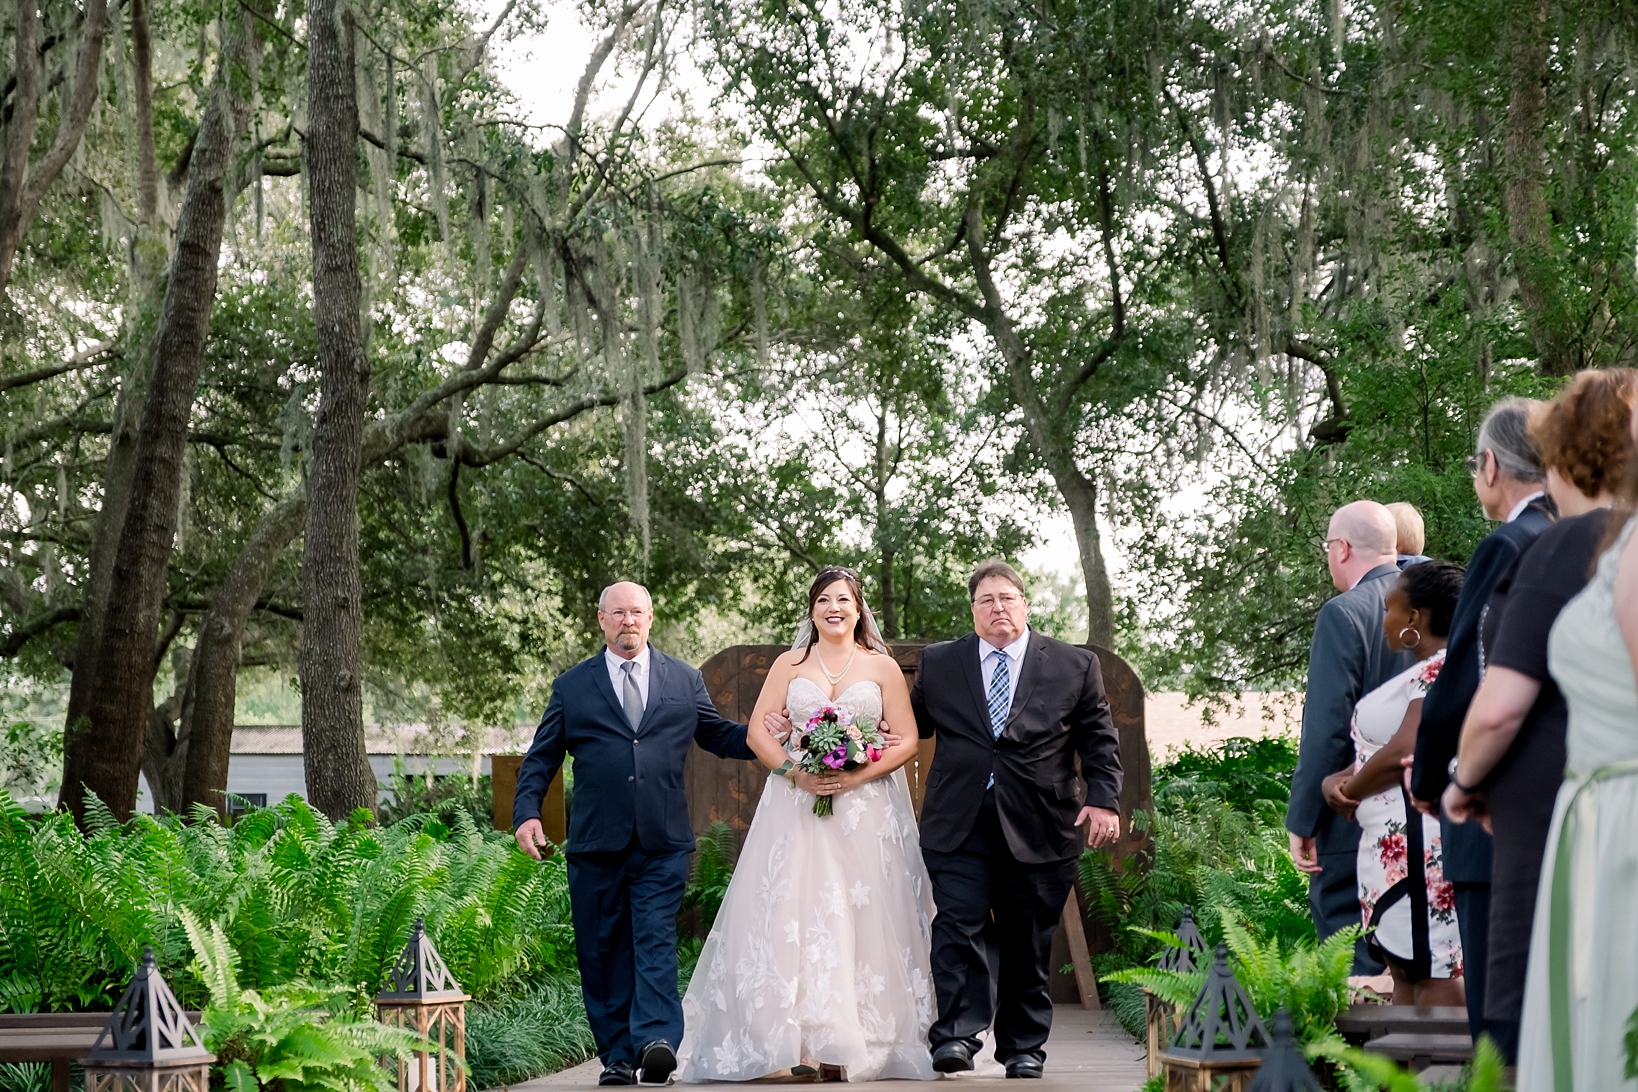 Bride walks down the aisle with her two dads on each arm during her cross creek wedding